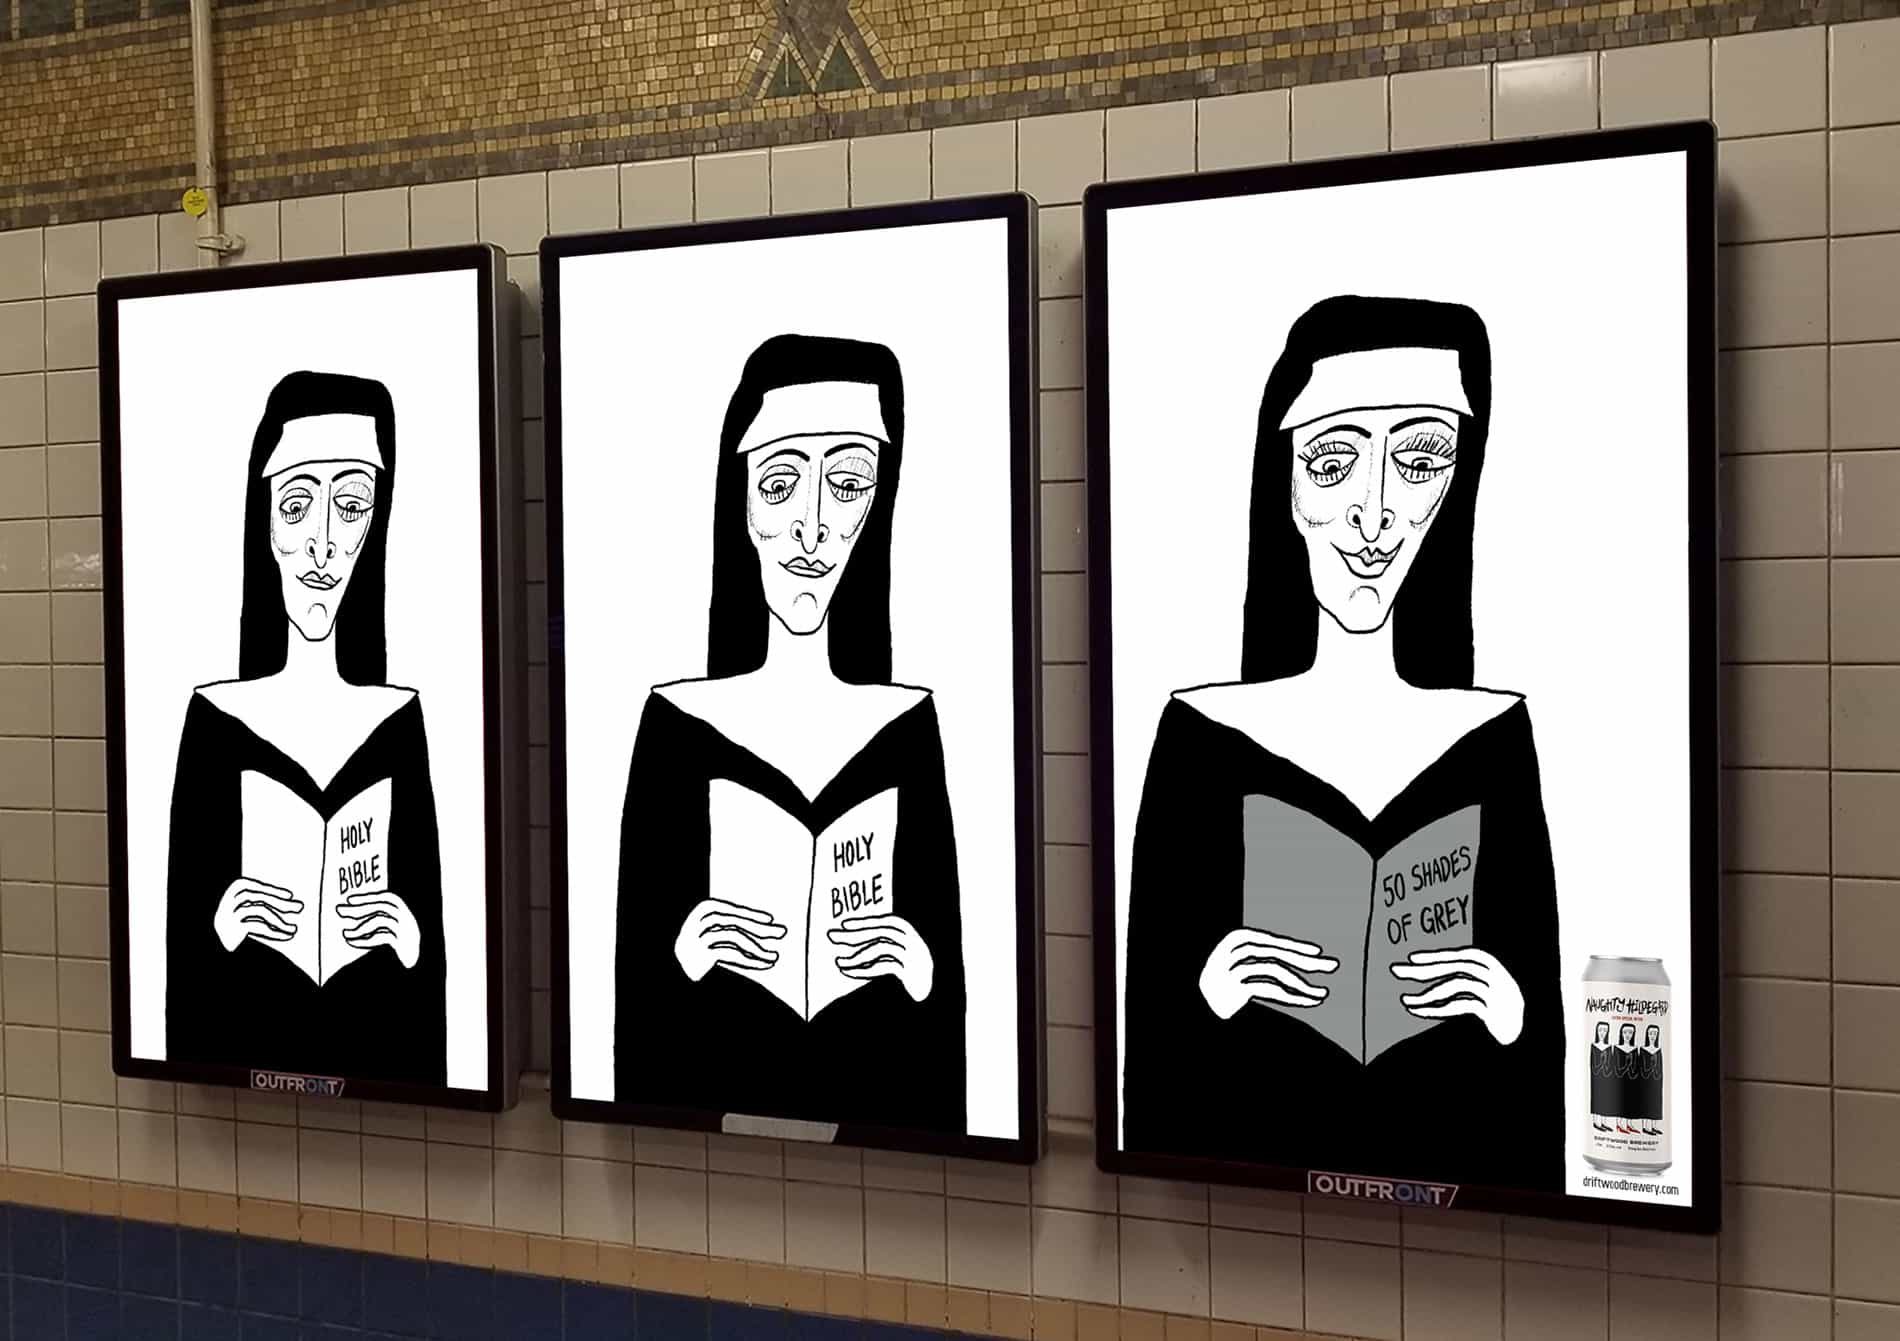 Naughty Hildegard beer promotion campaign illustrated posters in subway station of 3 nuns holding books, 2 nuns are reading the bible and the other is reading 50 shades of gray